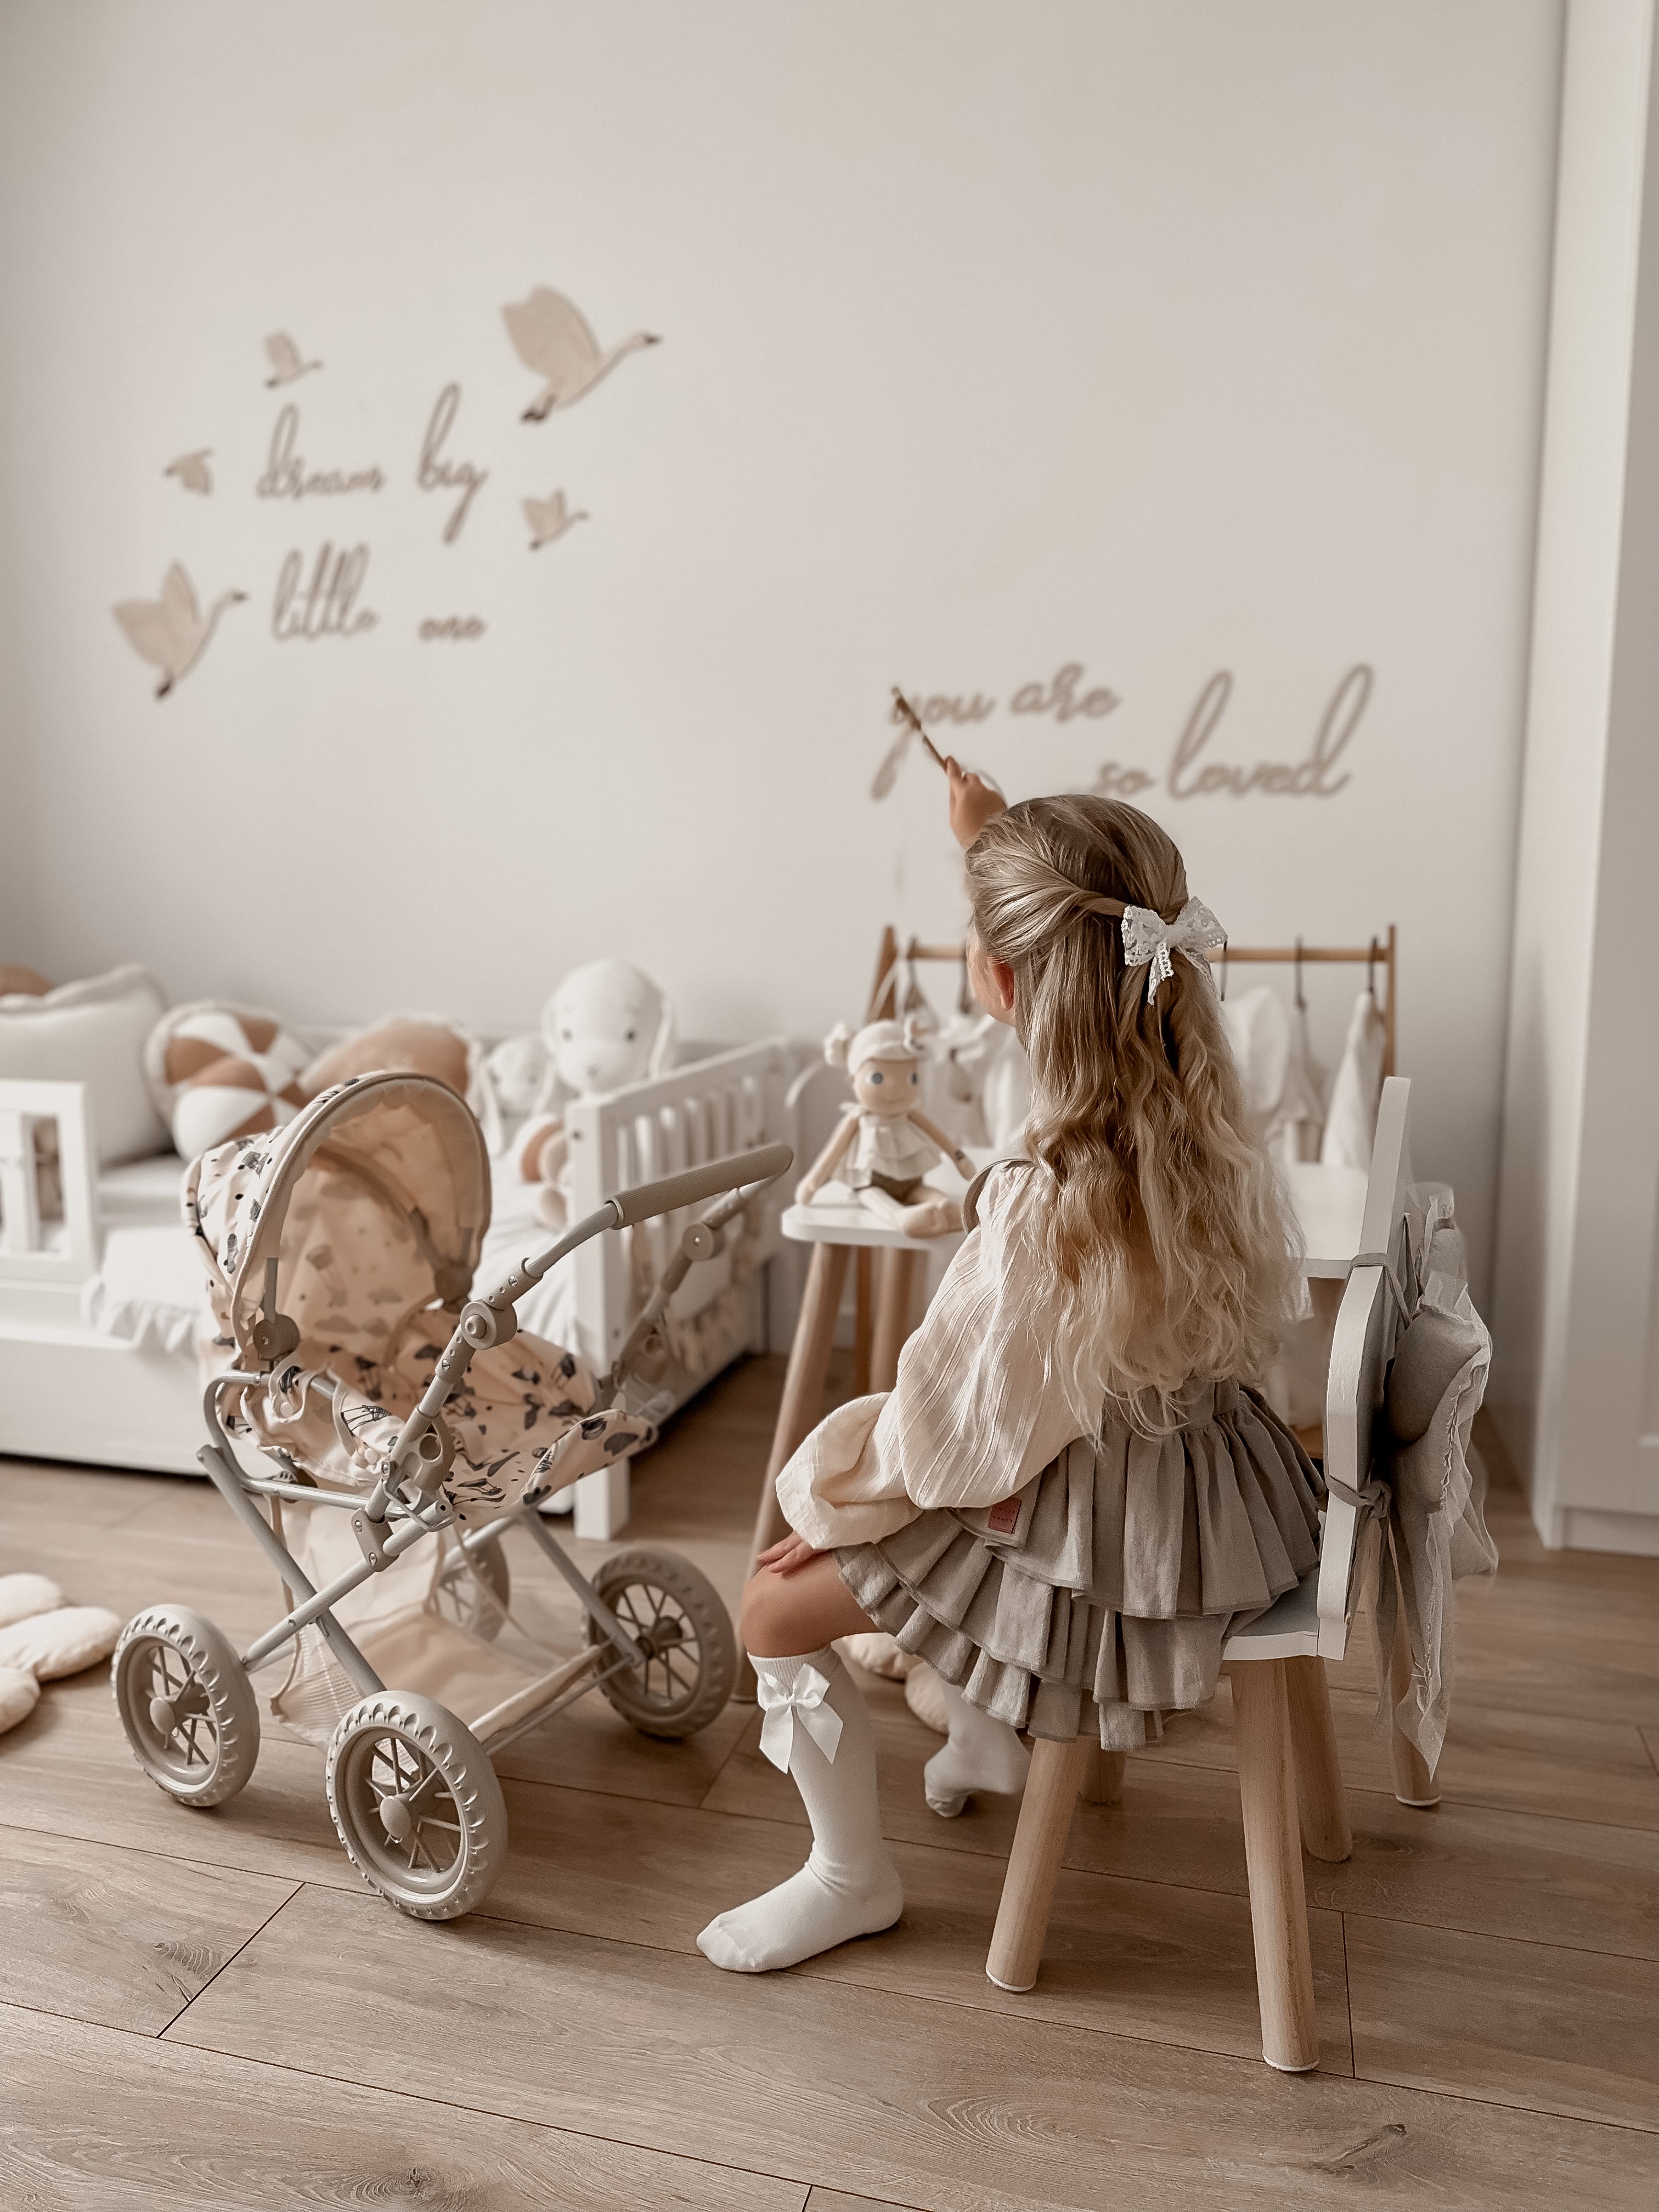 Linen bloomers with frills - TilianKids